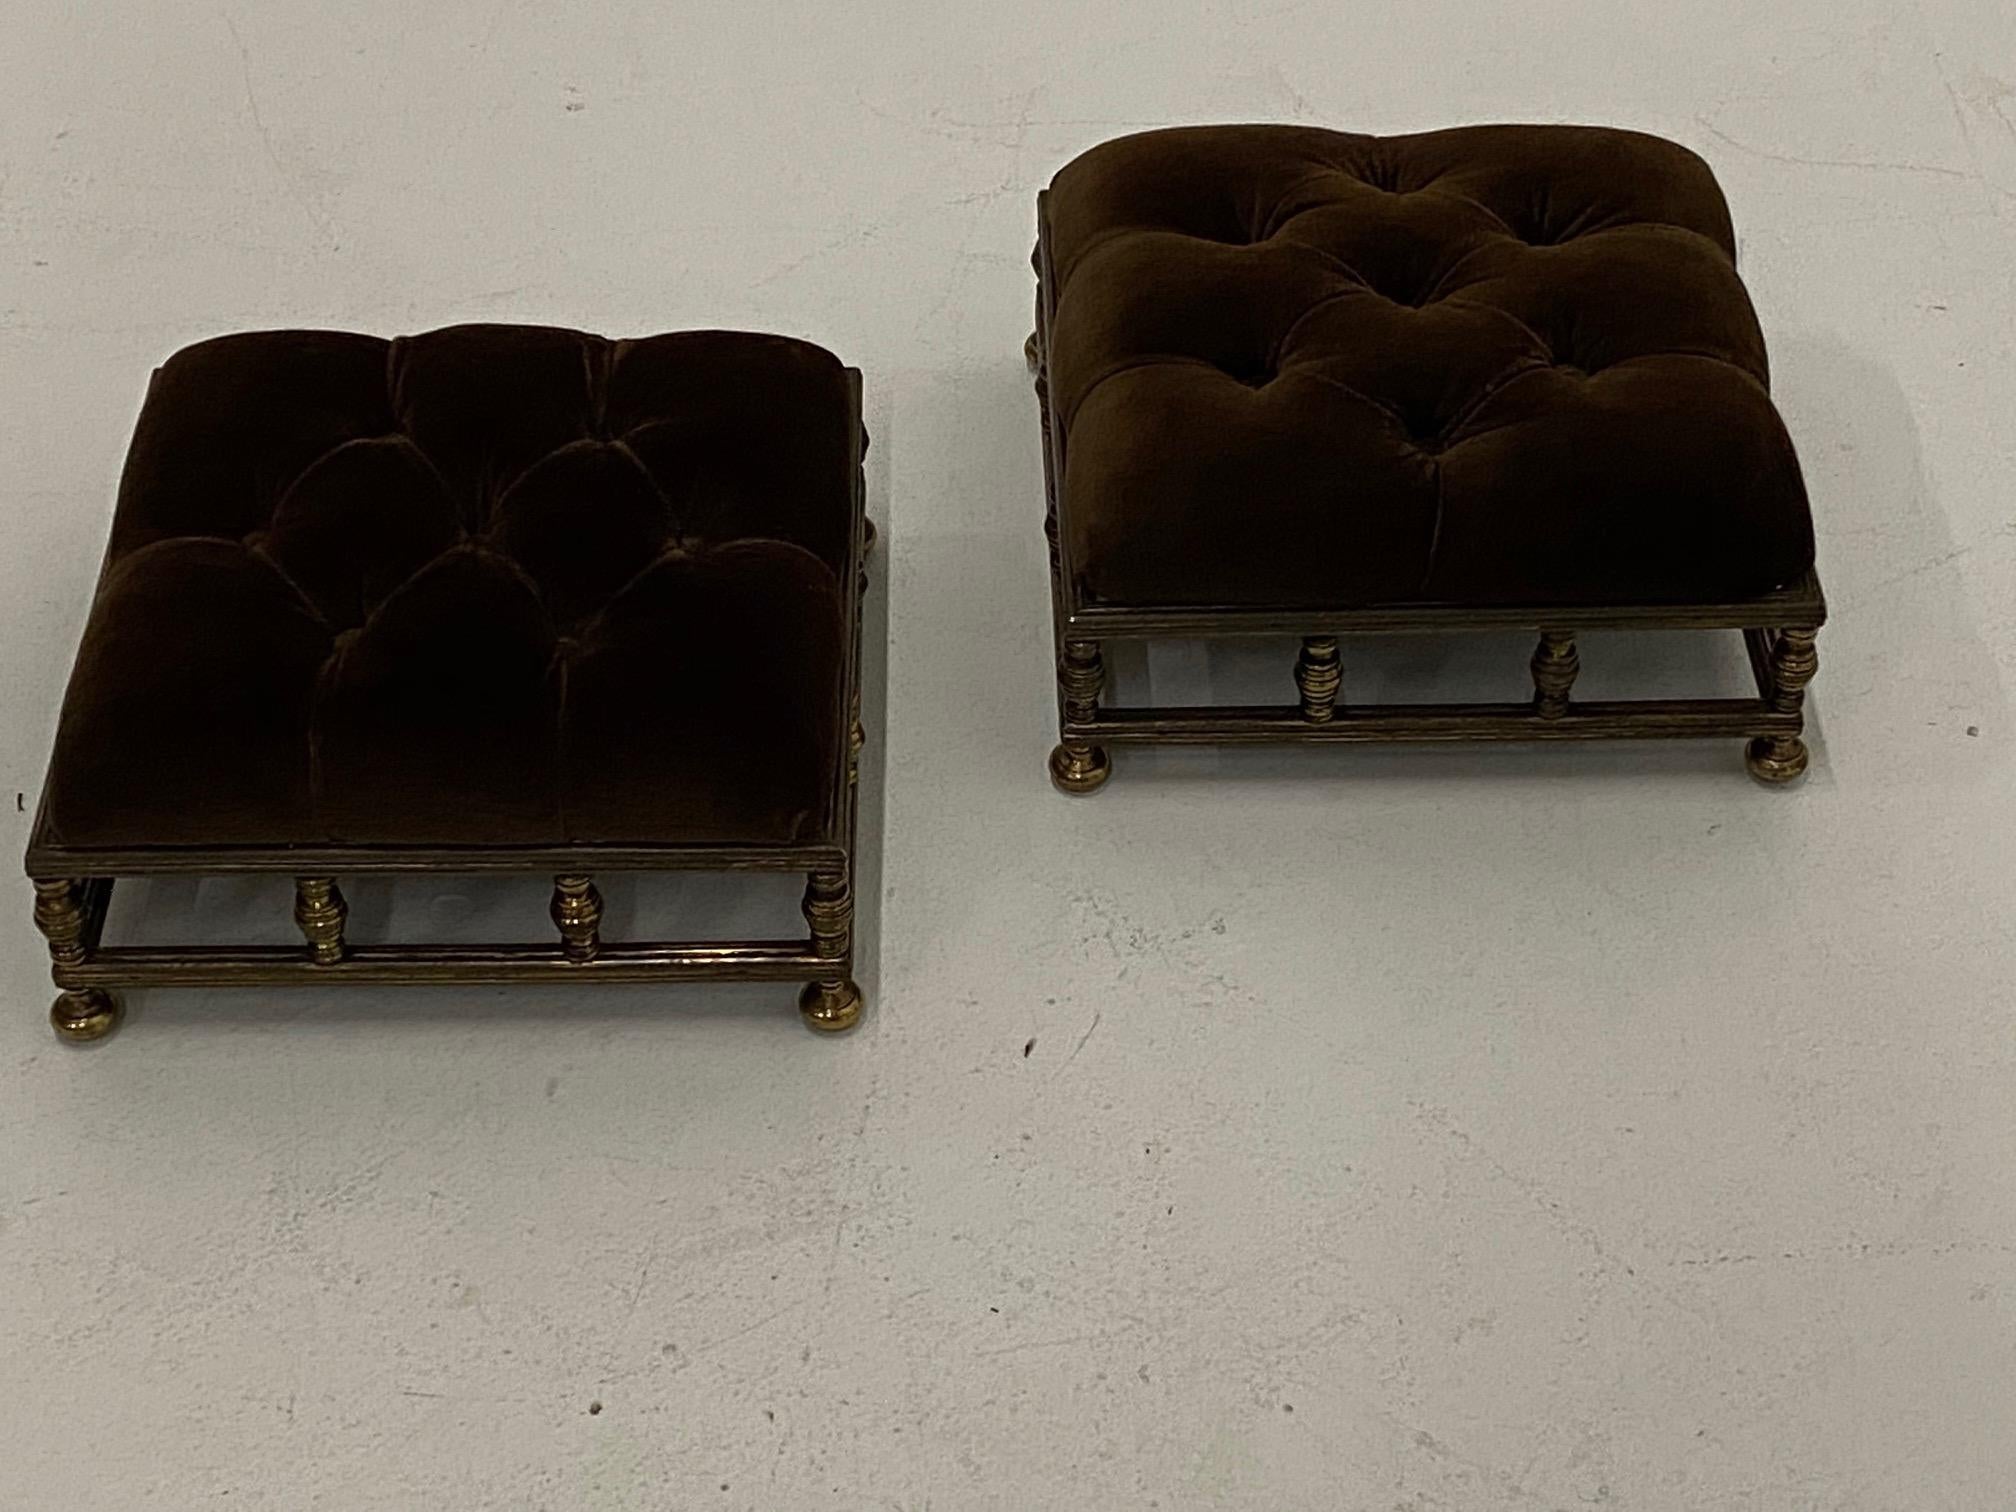 Sumptuous pair of Edwardian style footstools having brass bases and tufted brown velvet tops.